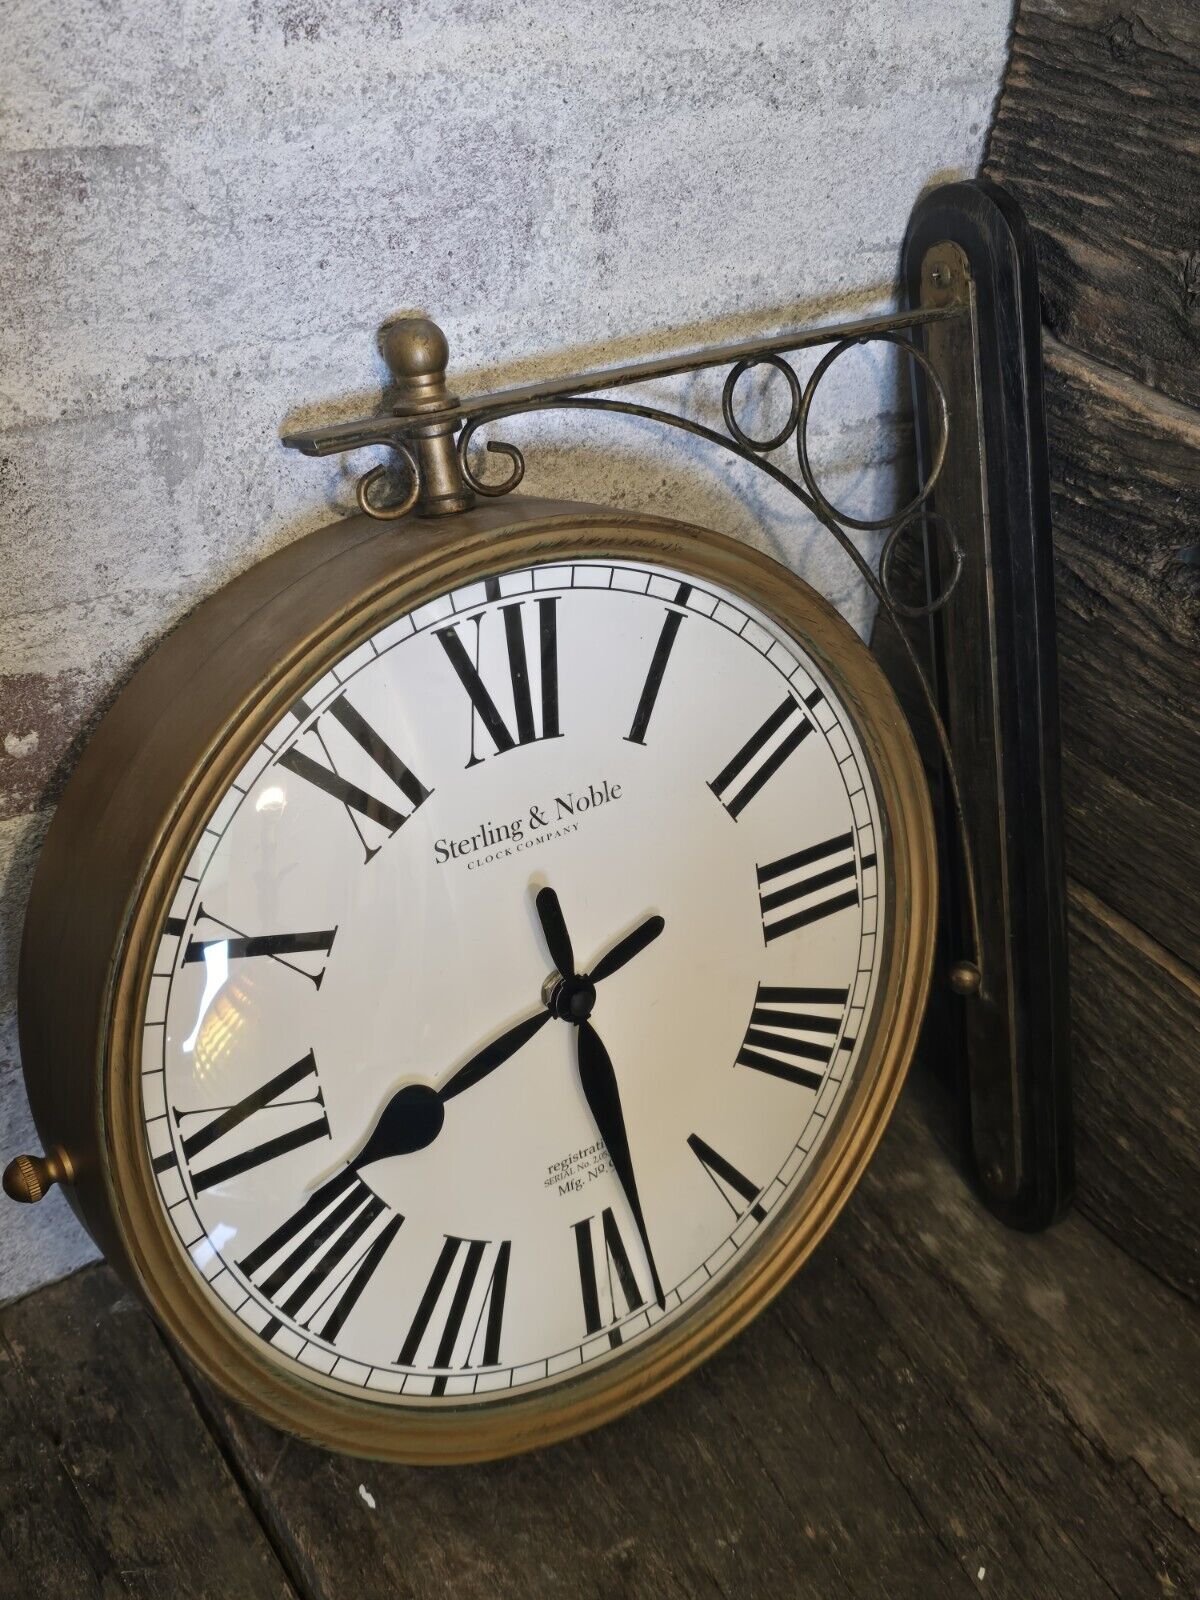 Vintage Double Sided Hanging Wall Clock Iron Train Station Stirling Noble No. 9